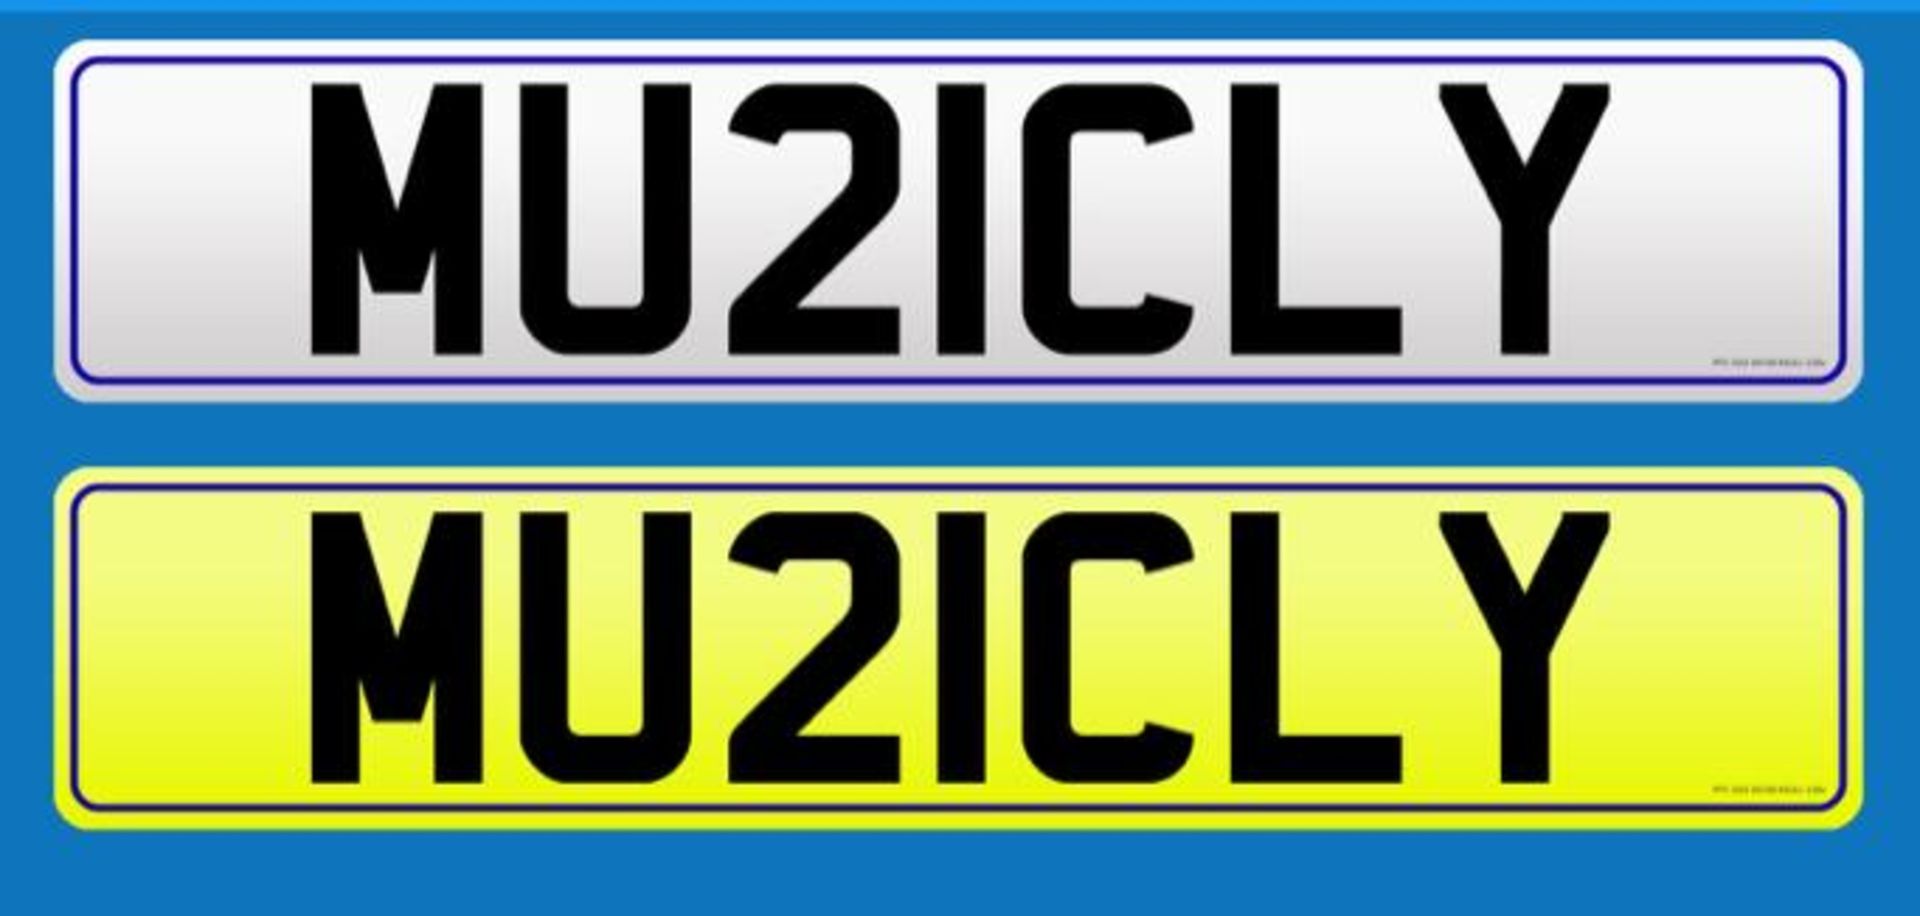 Music, DJ, Musician Private Registration Number *MU21 CLY* - Image 2 of 2